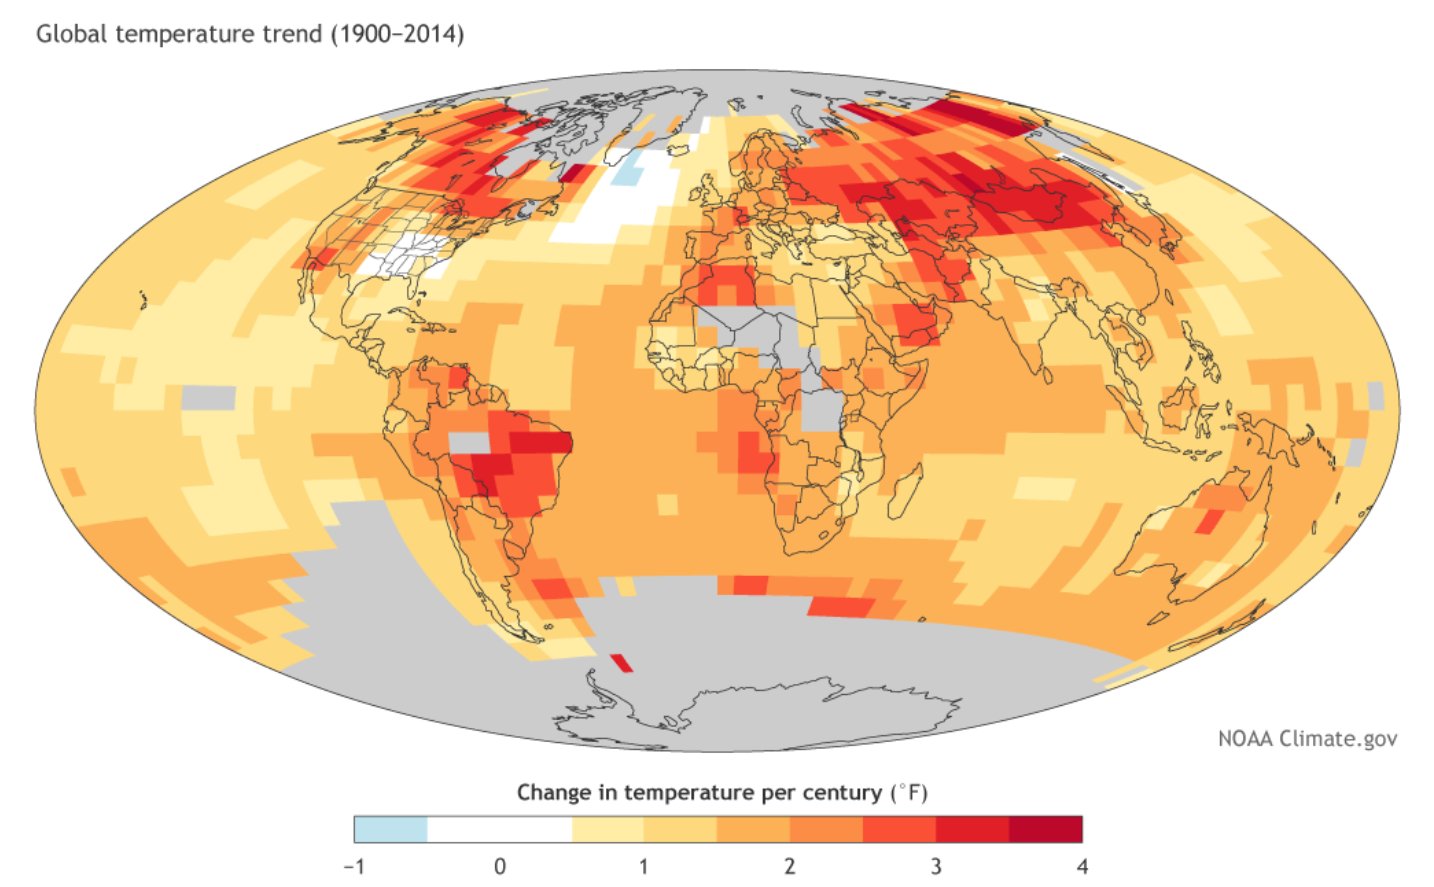 Map of the world showing the amount of climate warming over time. Land areas have has more warming than over the ocean. Areas in the far north (such as Canada, Russia) have generally warmed the most as have Mongolia, Kazakhstan, and Brazil. 